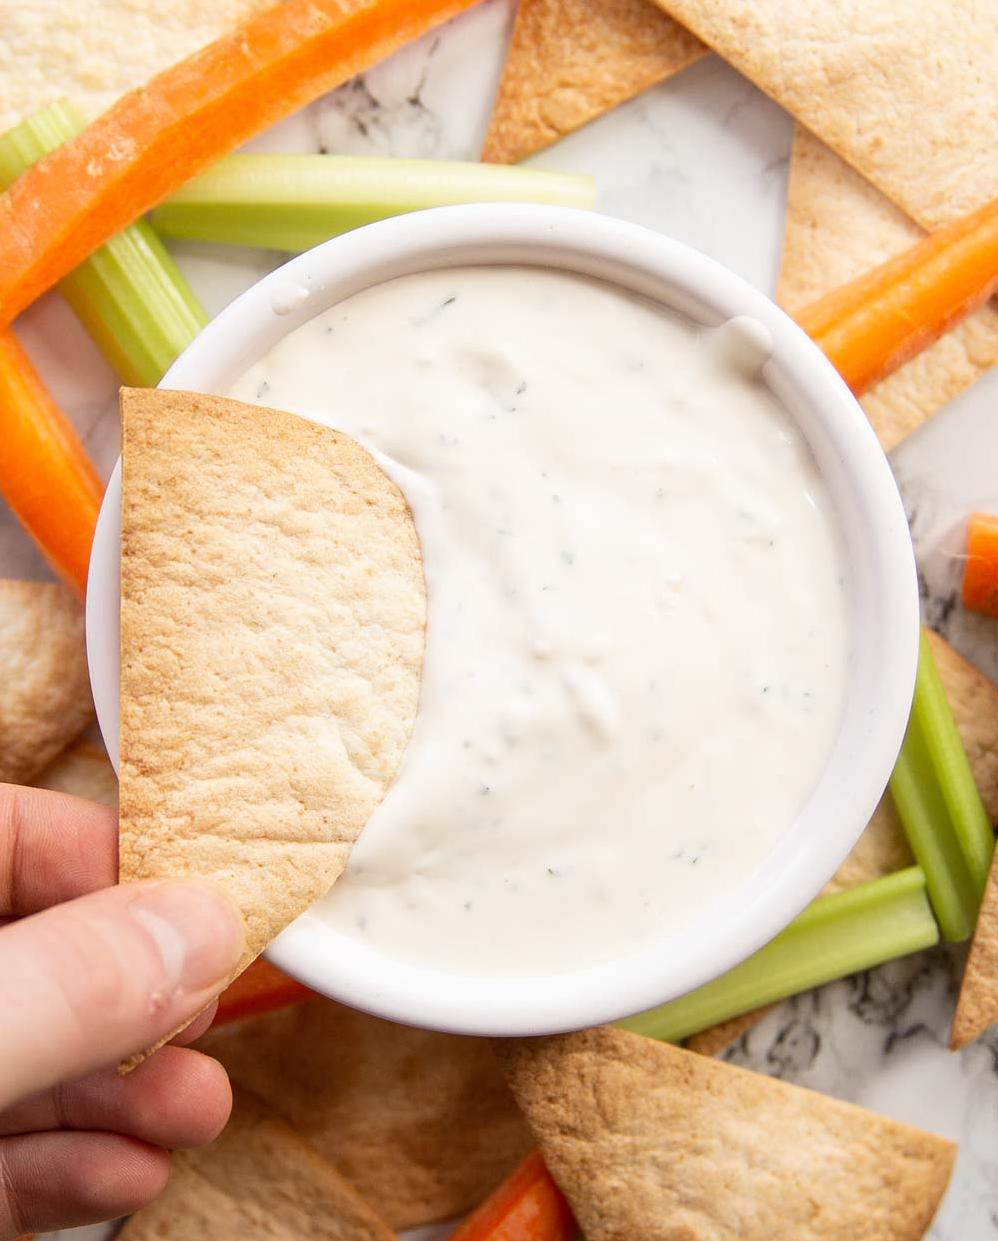  An irresistible, creamy dip packed full of garlic goodness!